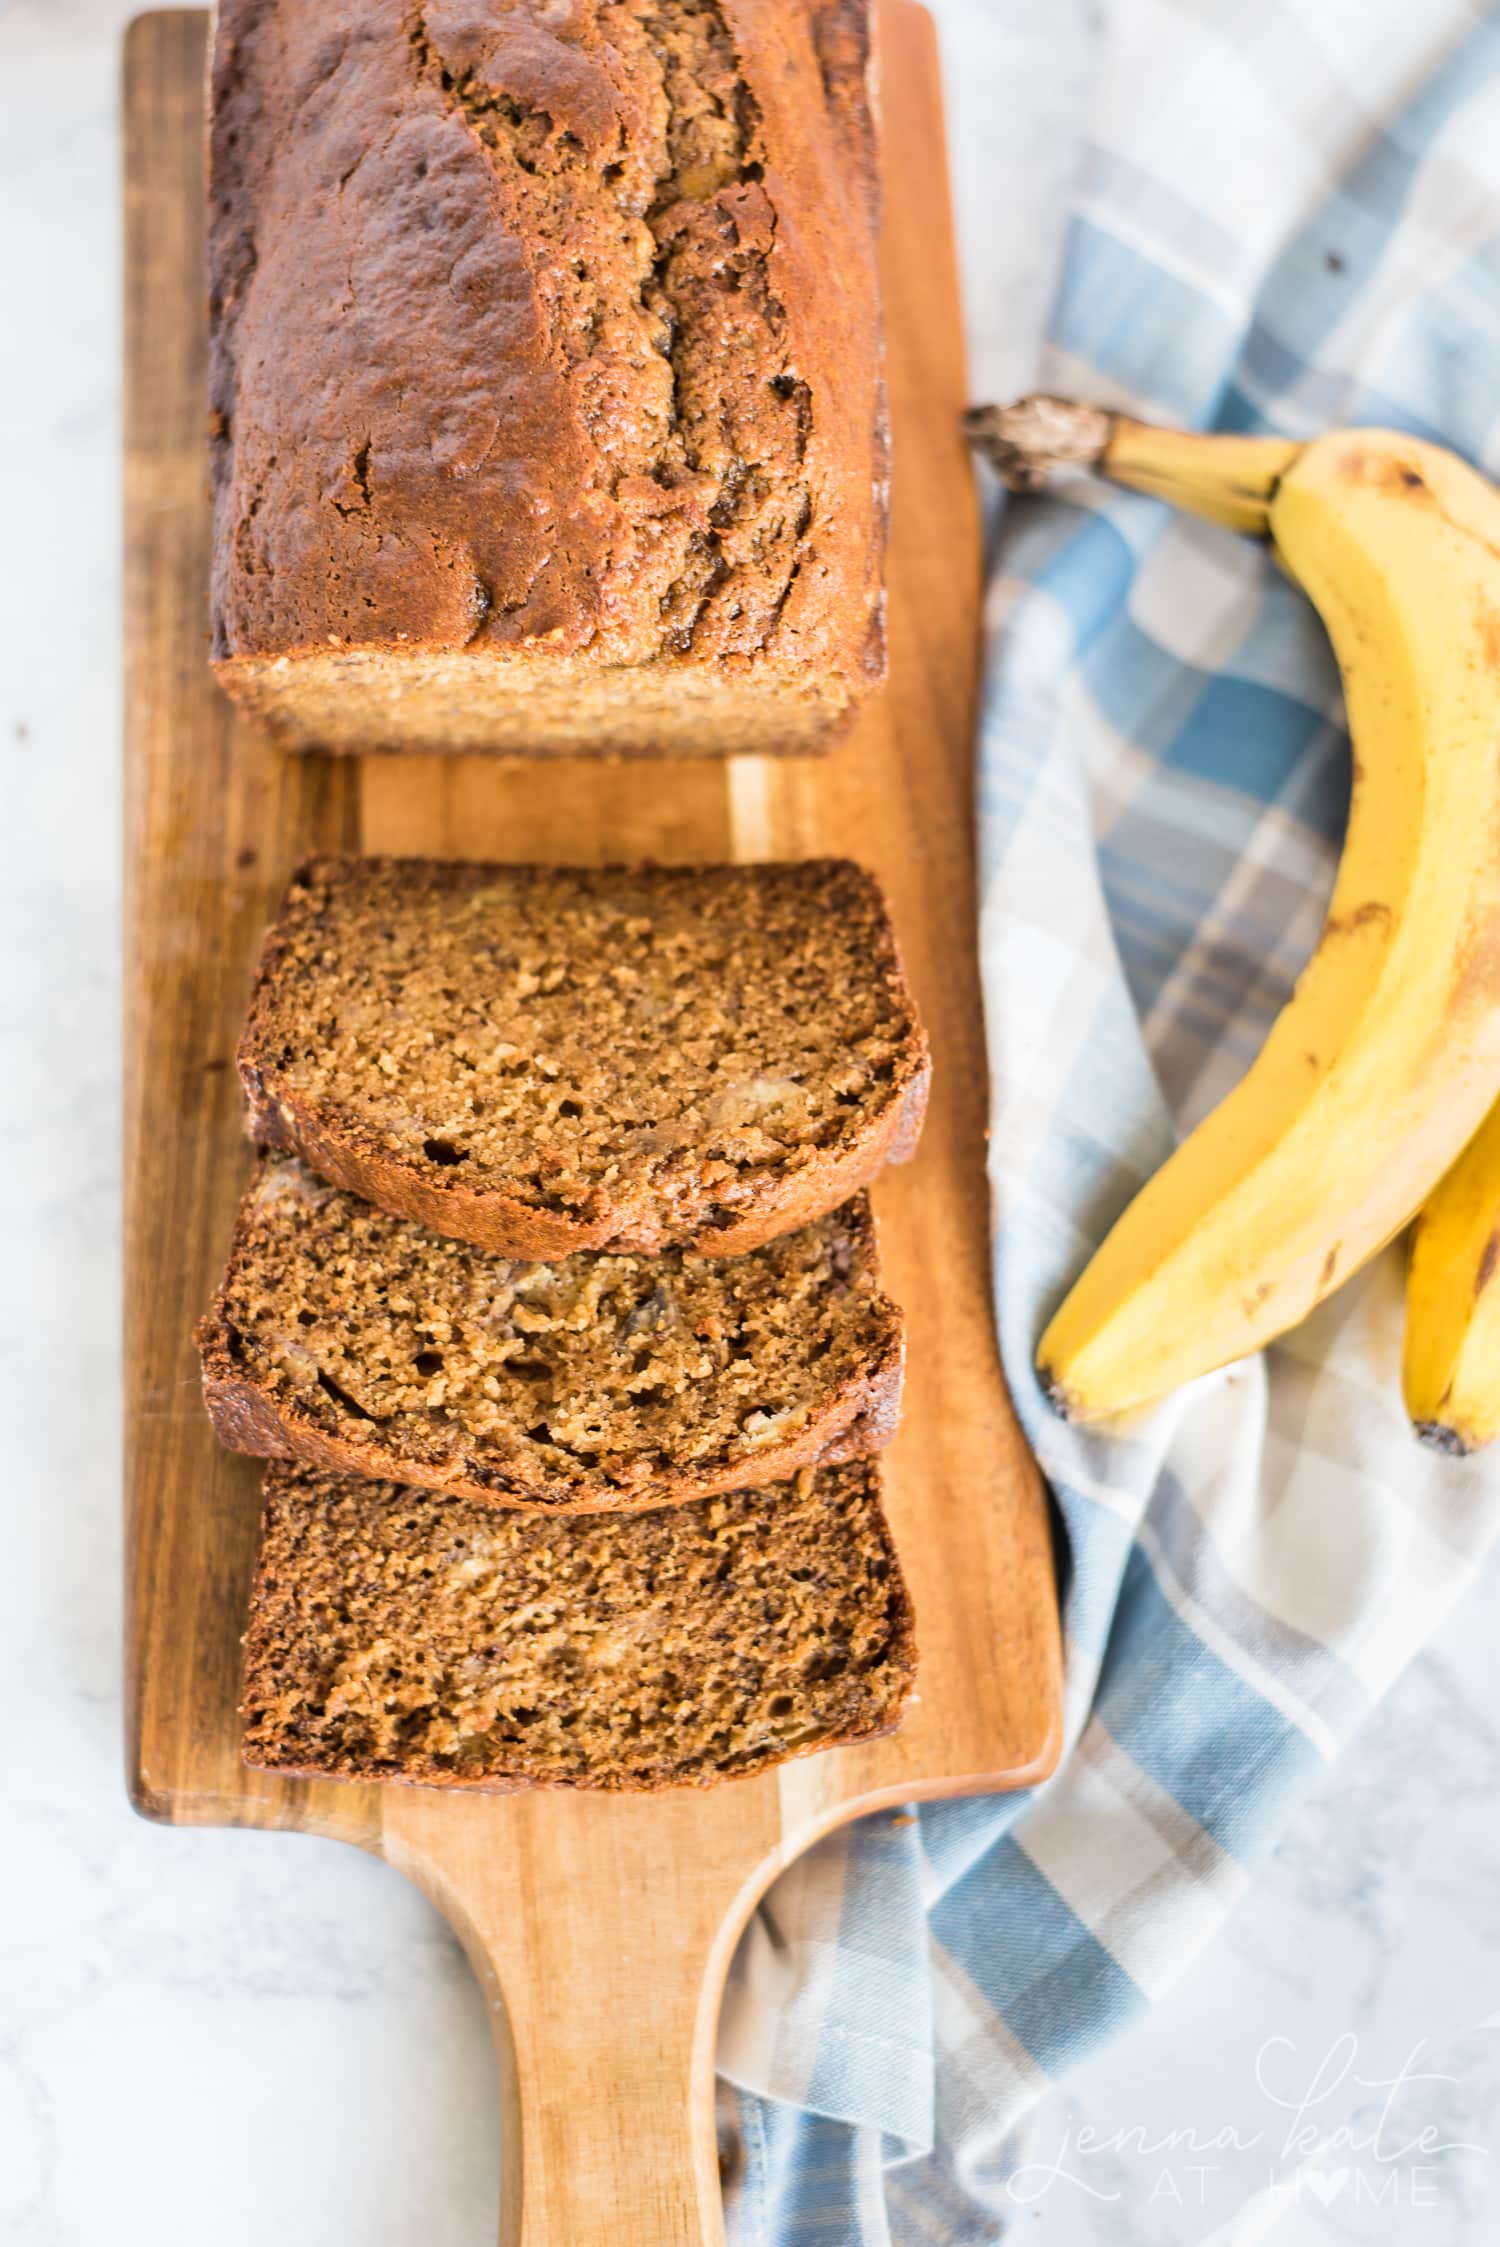 The world's best banana bread made with sour cream or creme fraiche